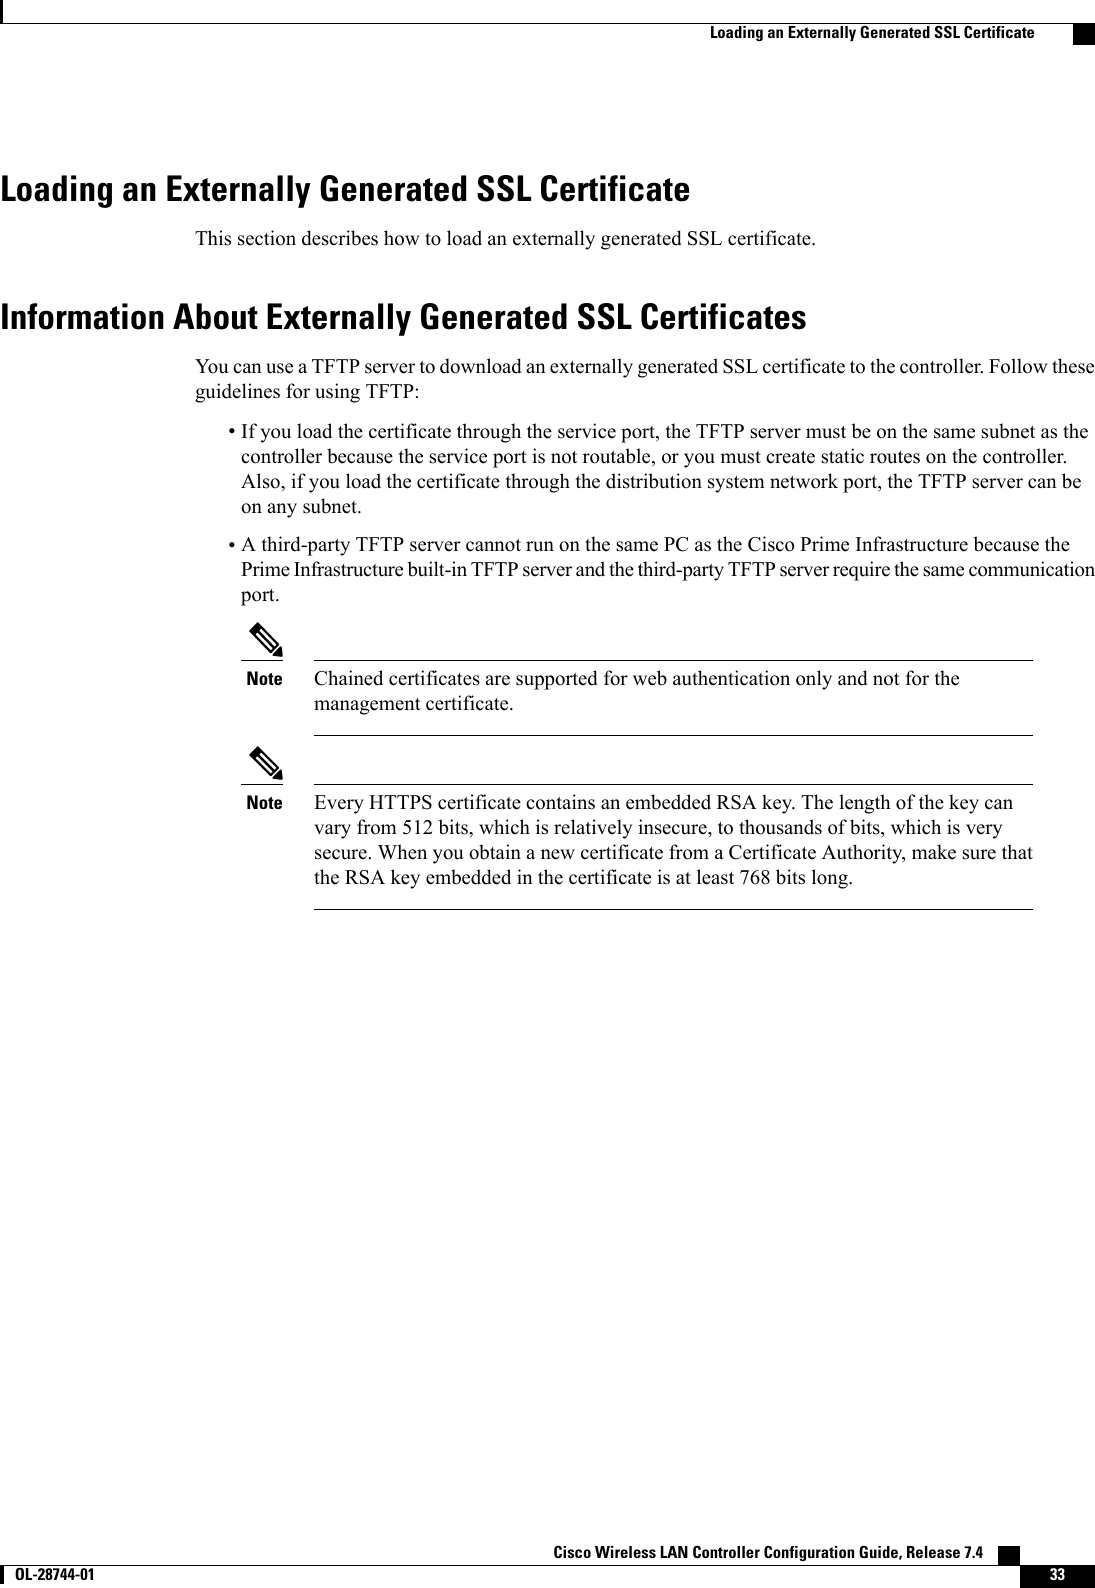 Loading an Externally Generated SSL CertificateThis section describes how to load an externally generated SSL certificate.Information About Externally Generated SSL CertificatesYou can use a TFTP server to download an externally generated SSL certificate to the controller. Follow theseguidelines for using TFTP:•If you load the certificate through the service port, the TFTP server must be on the same subnet as thecontroller because the service port is not routable, or you must create static routes on the controller.Also, if you load the certificate through the distribution system network port, the TFTP server can beon any subnet.•A third-party TFTP server cannot run on the same PC as the Cisco Prime Infrastructure because thePrime Infrastructure built-in TFTP server and the third-party TFTP server require the same communicationport.Chained certificates are supported for web authentication only and not for themanagement certificate.NoteEvery HTTPS certificate contains an embedded RSA key. The length of the key canvary from 512 bits, which is relatively insecure, to thousands of bits, which is verysecure. When you obtain a new certificate from a Certificate Authority, make sure thatthe RSA key embedded in the certificate is at least 768 bits long.NoteCisco Wireless LAN Controller Configuration Guide, Release 7.4       OL-28744-01 33Loading an Externally Generated SSL Certificate